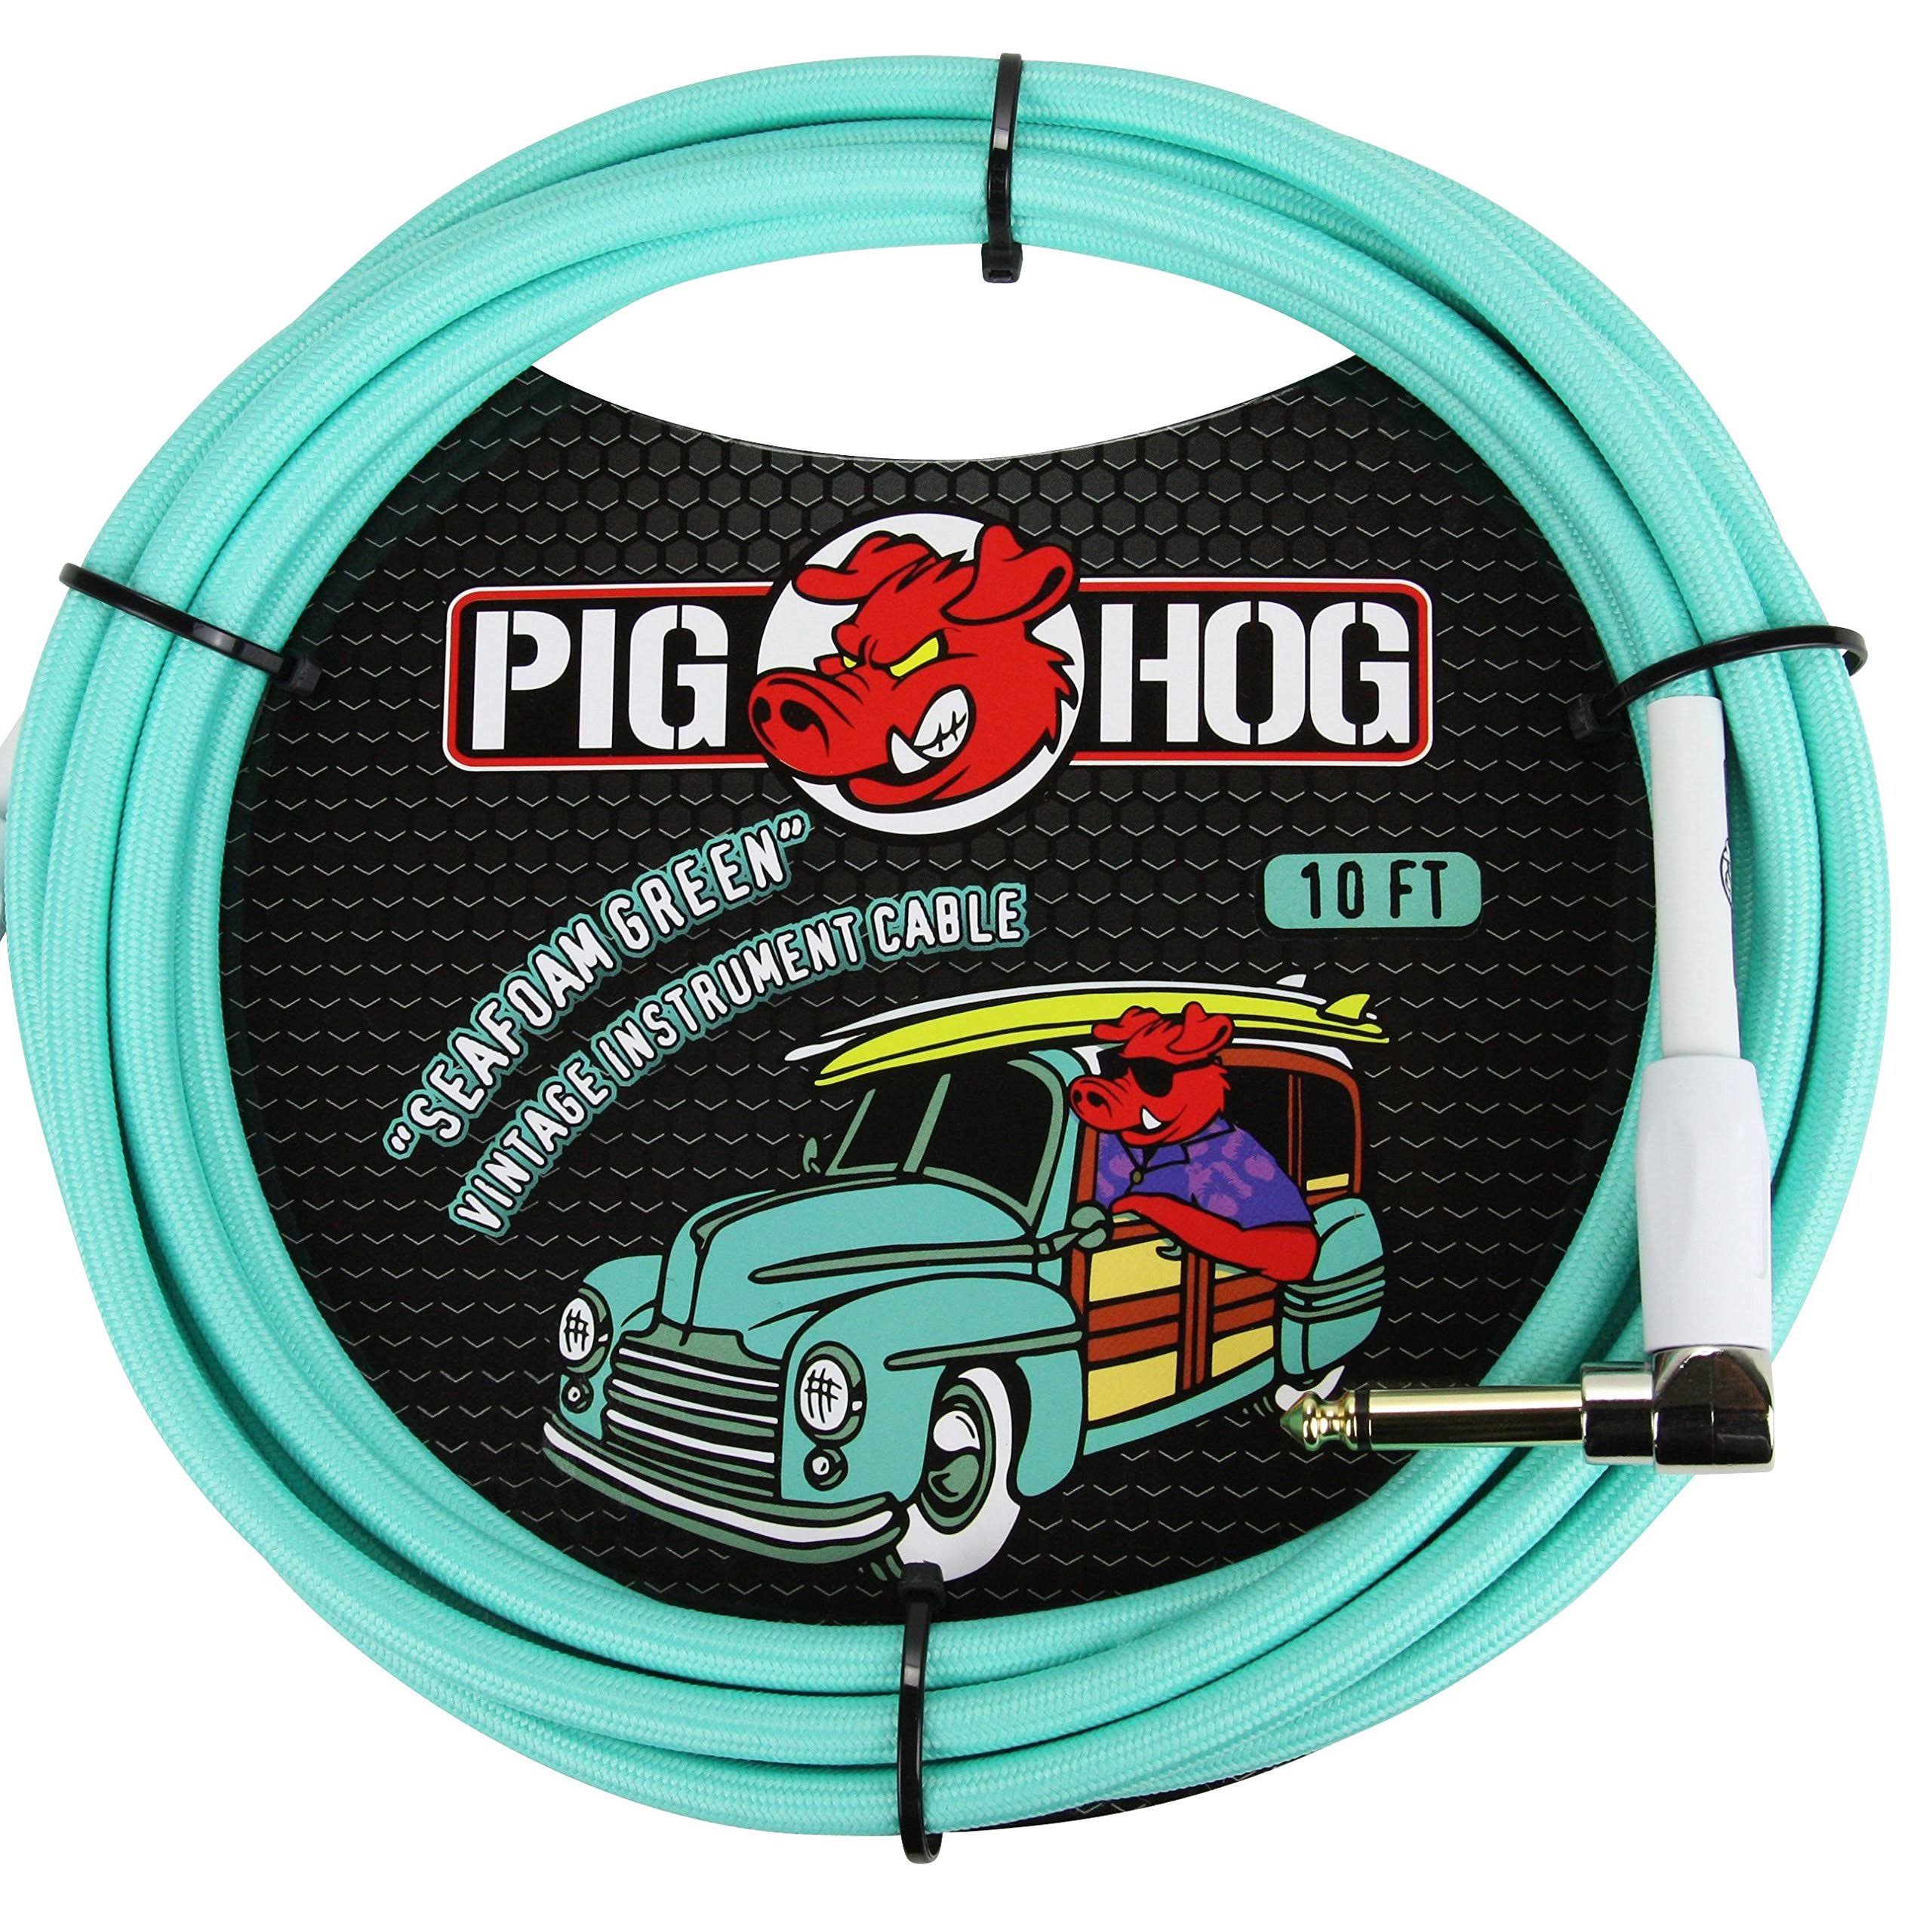 Pig Hog Right Angle Instrument Cable - 10', Seafoam Green